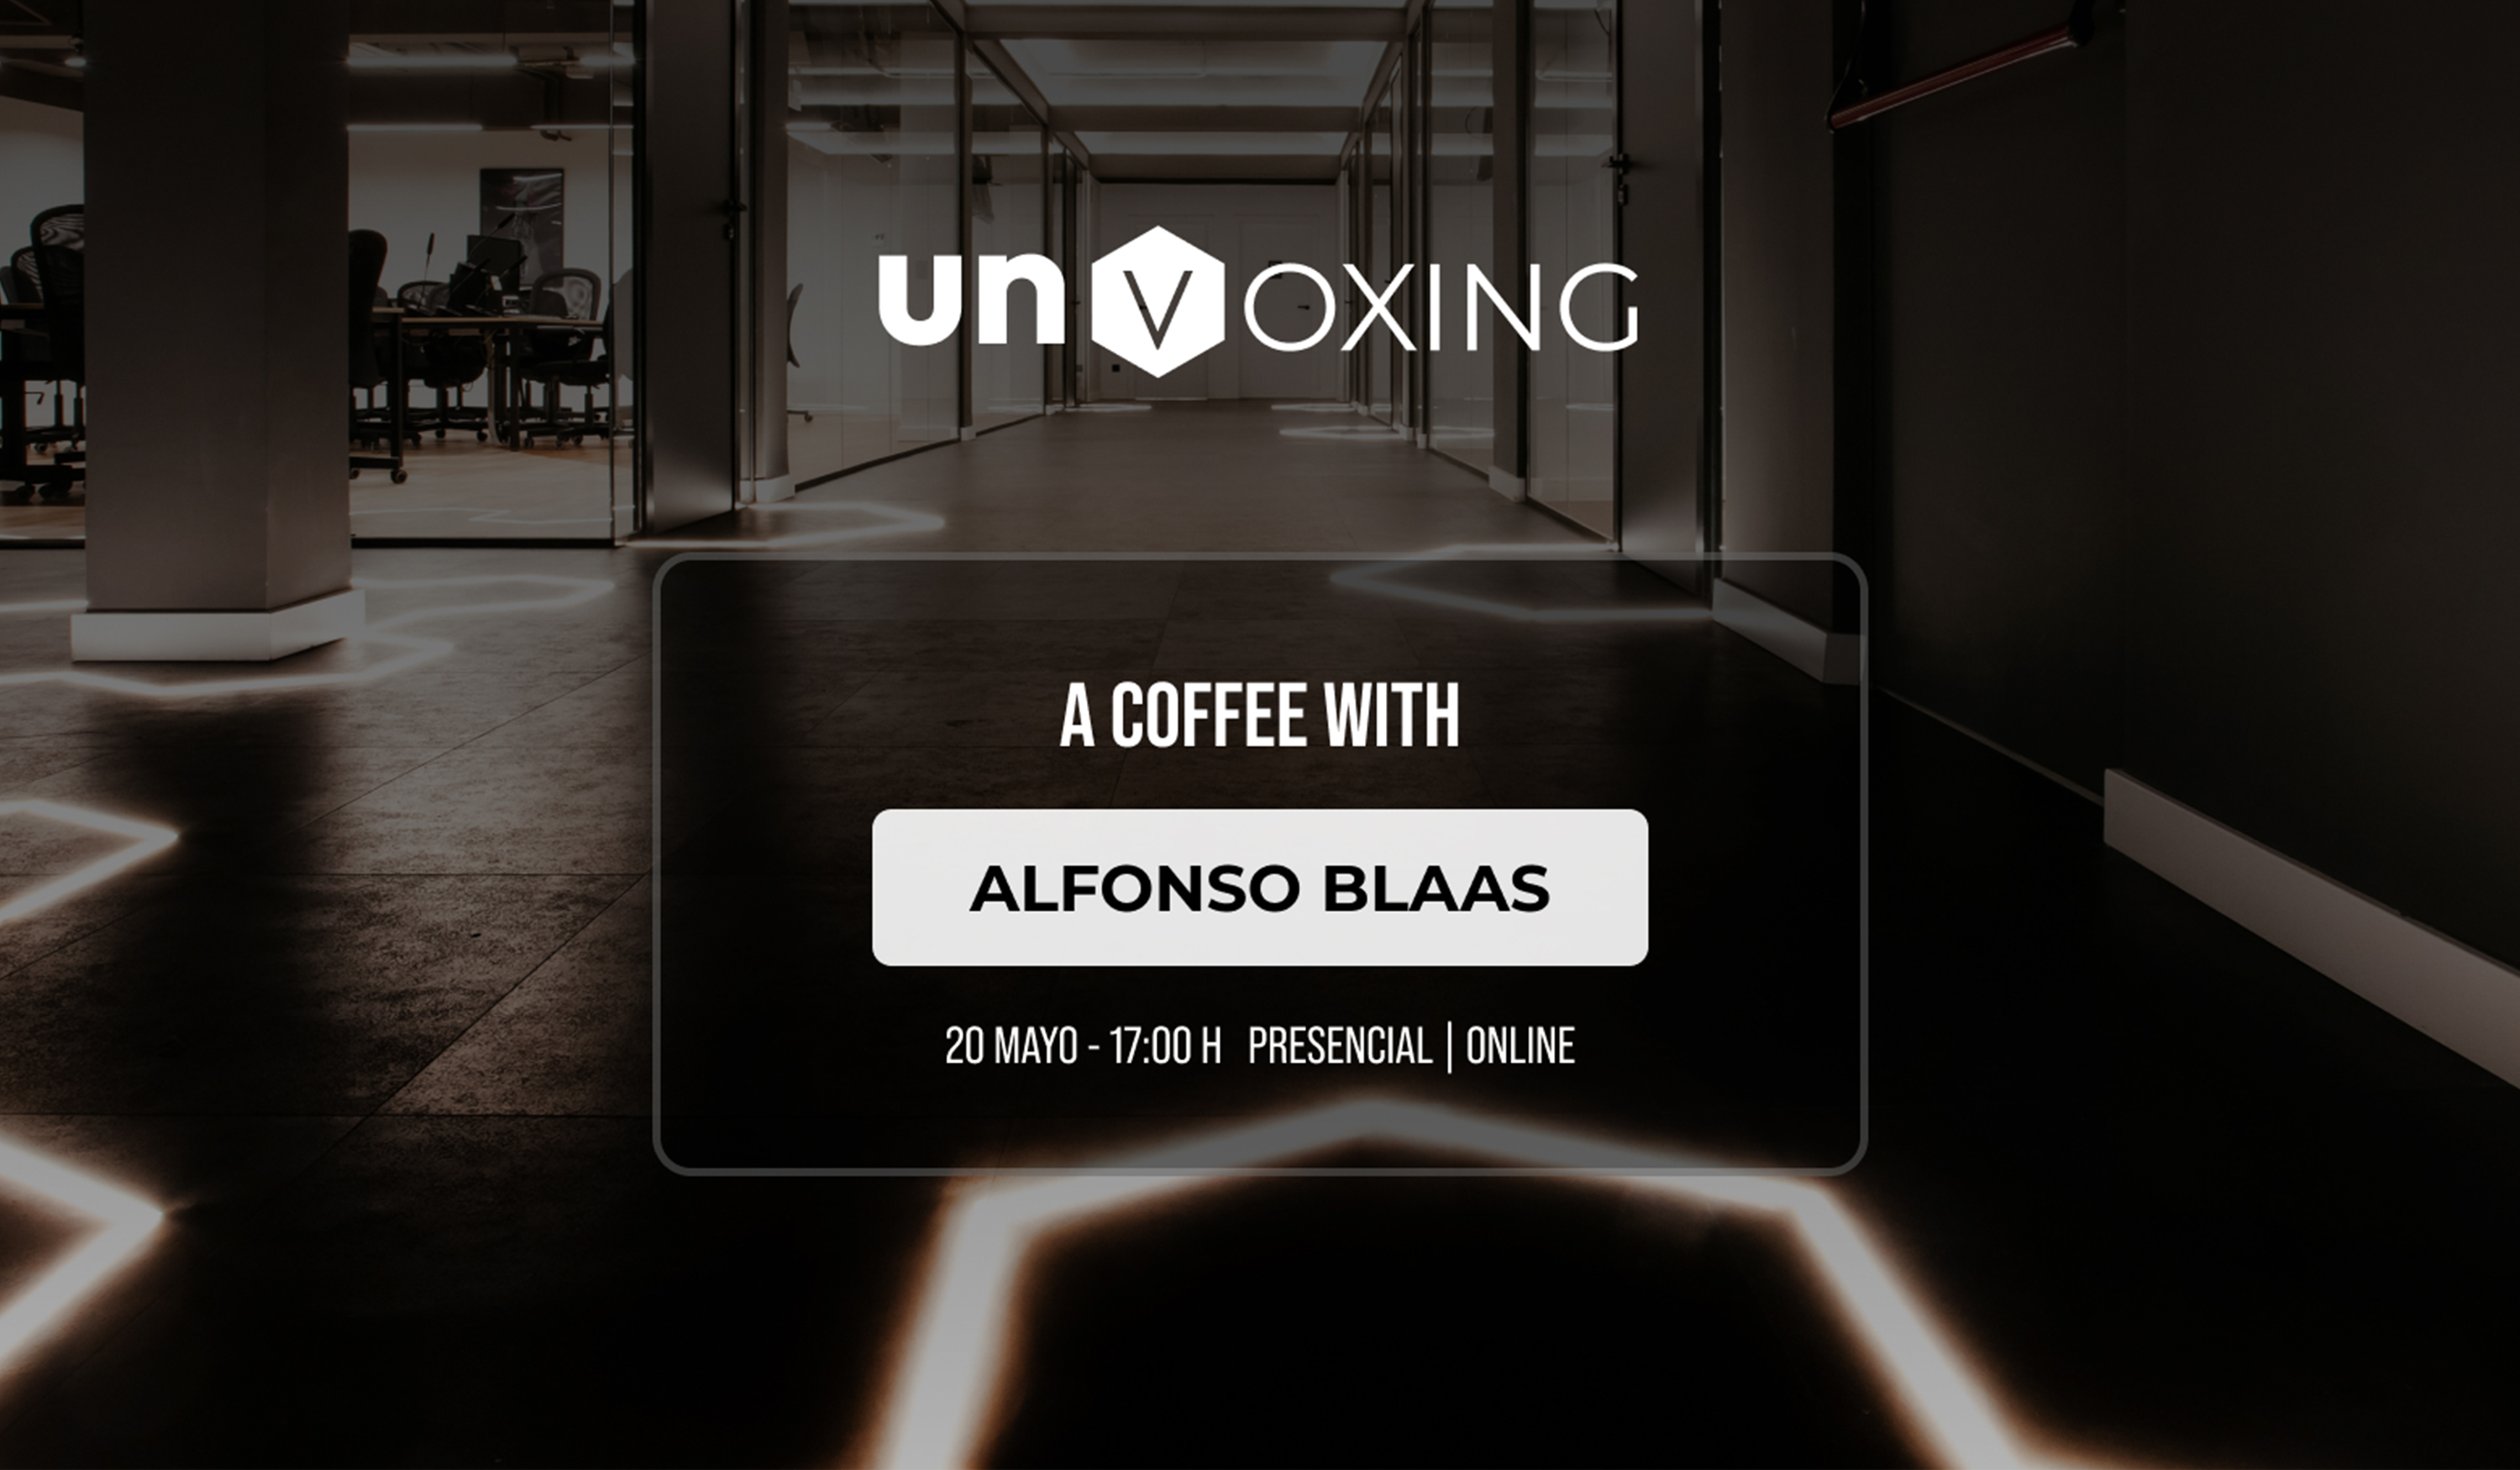 A coffee with Alfonso Blaas